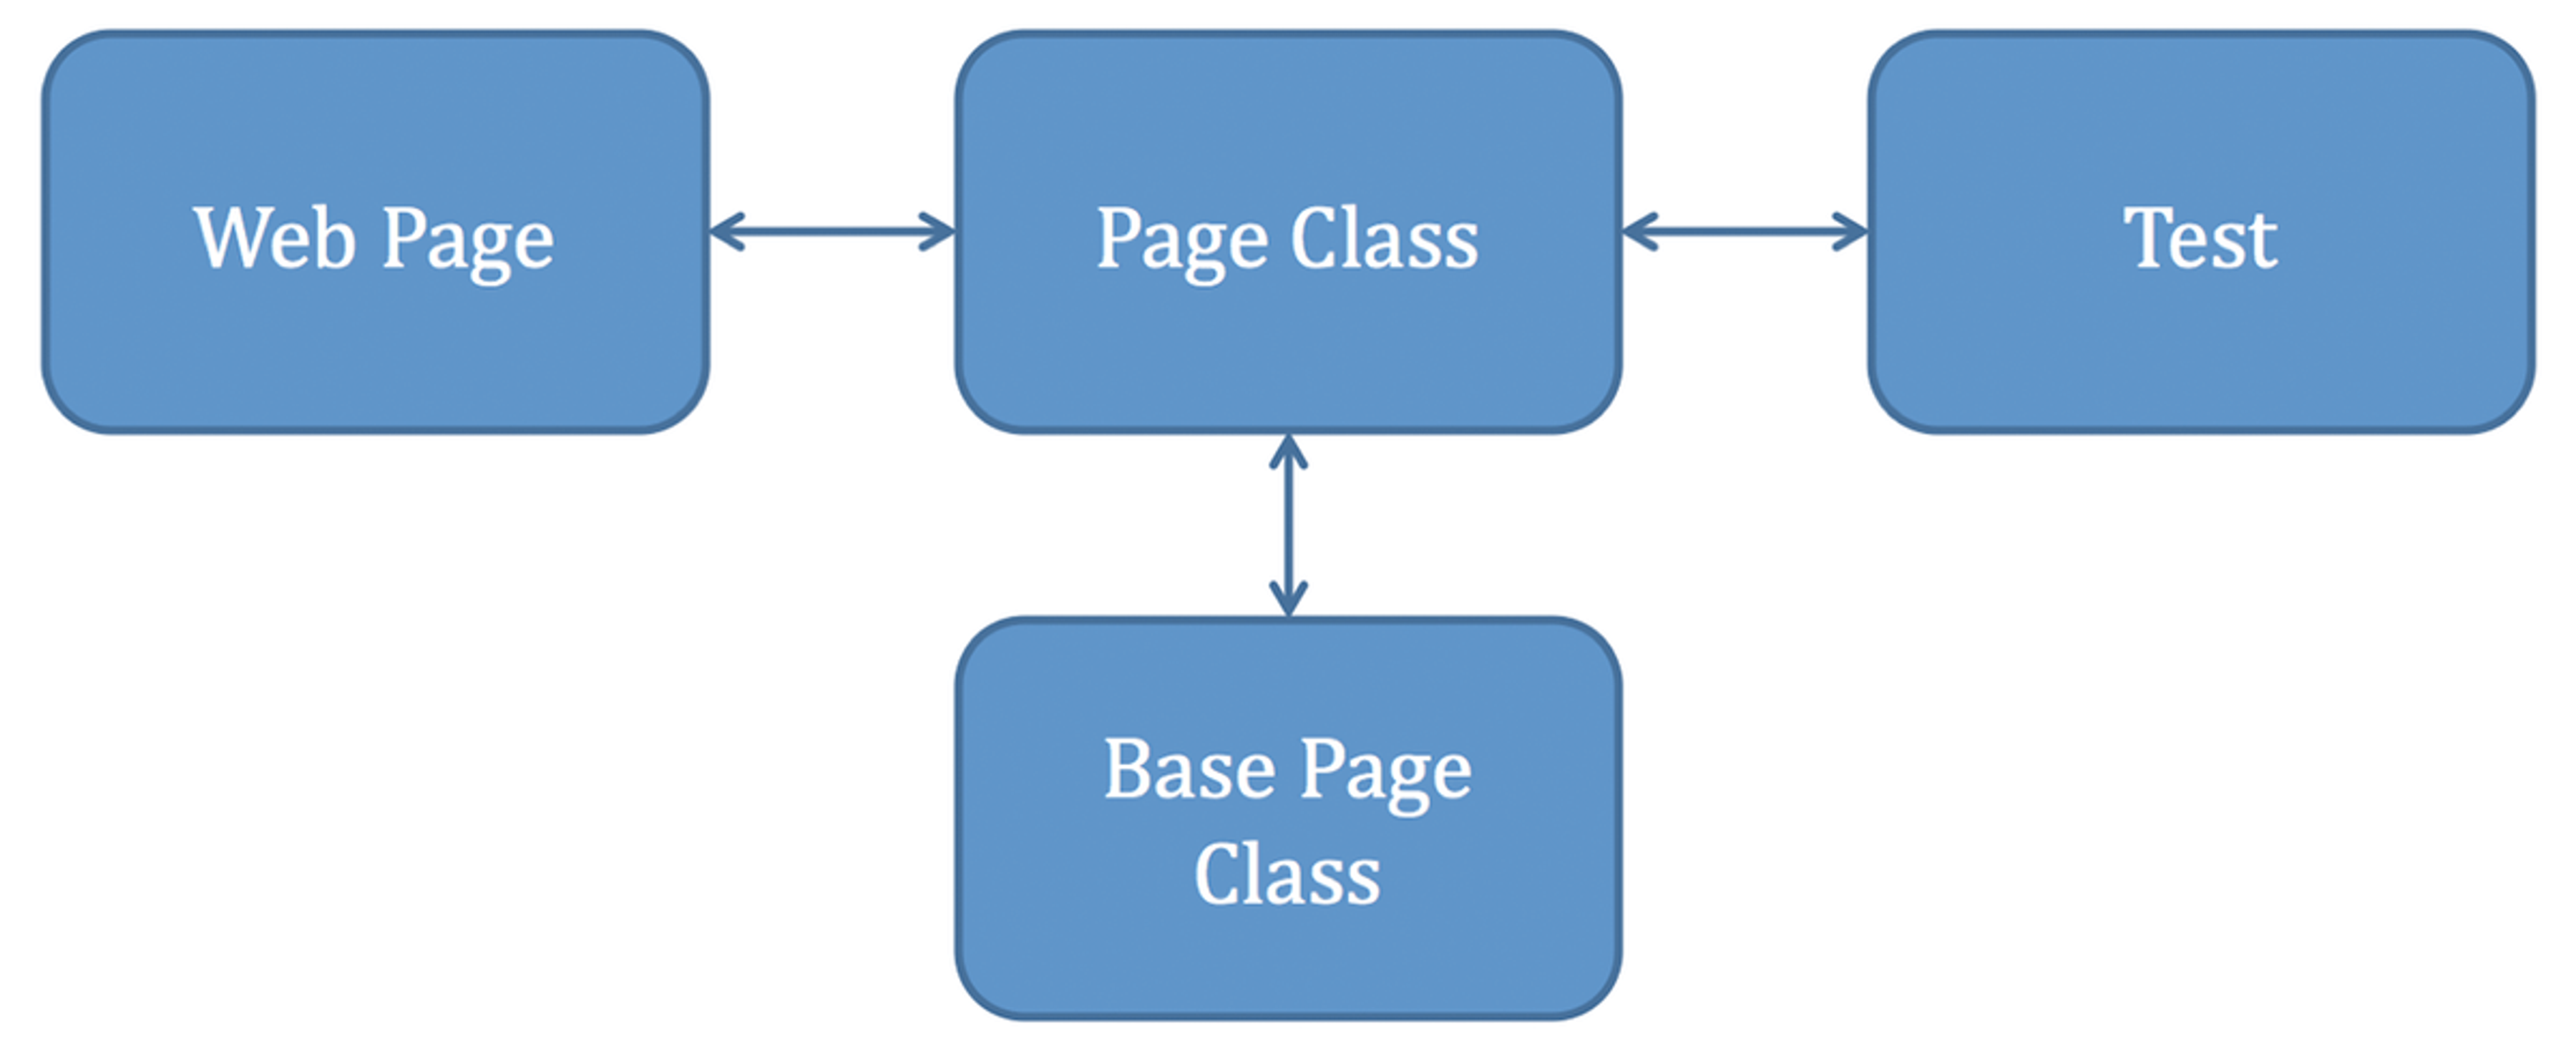 Diagram showing relationship between web page, page class, test, and base page